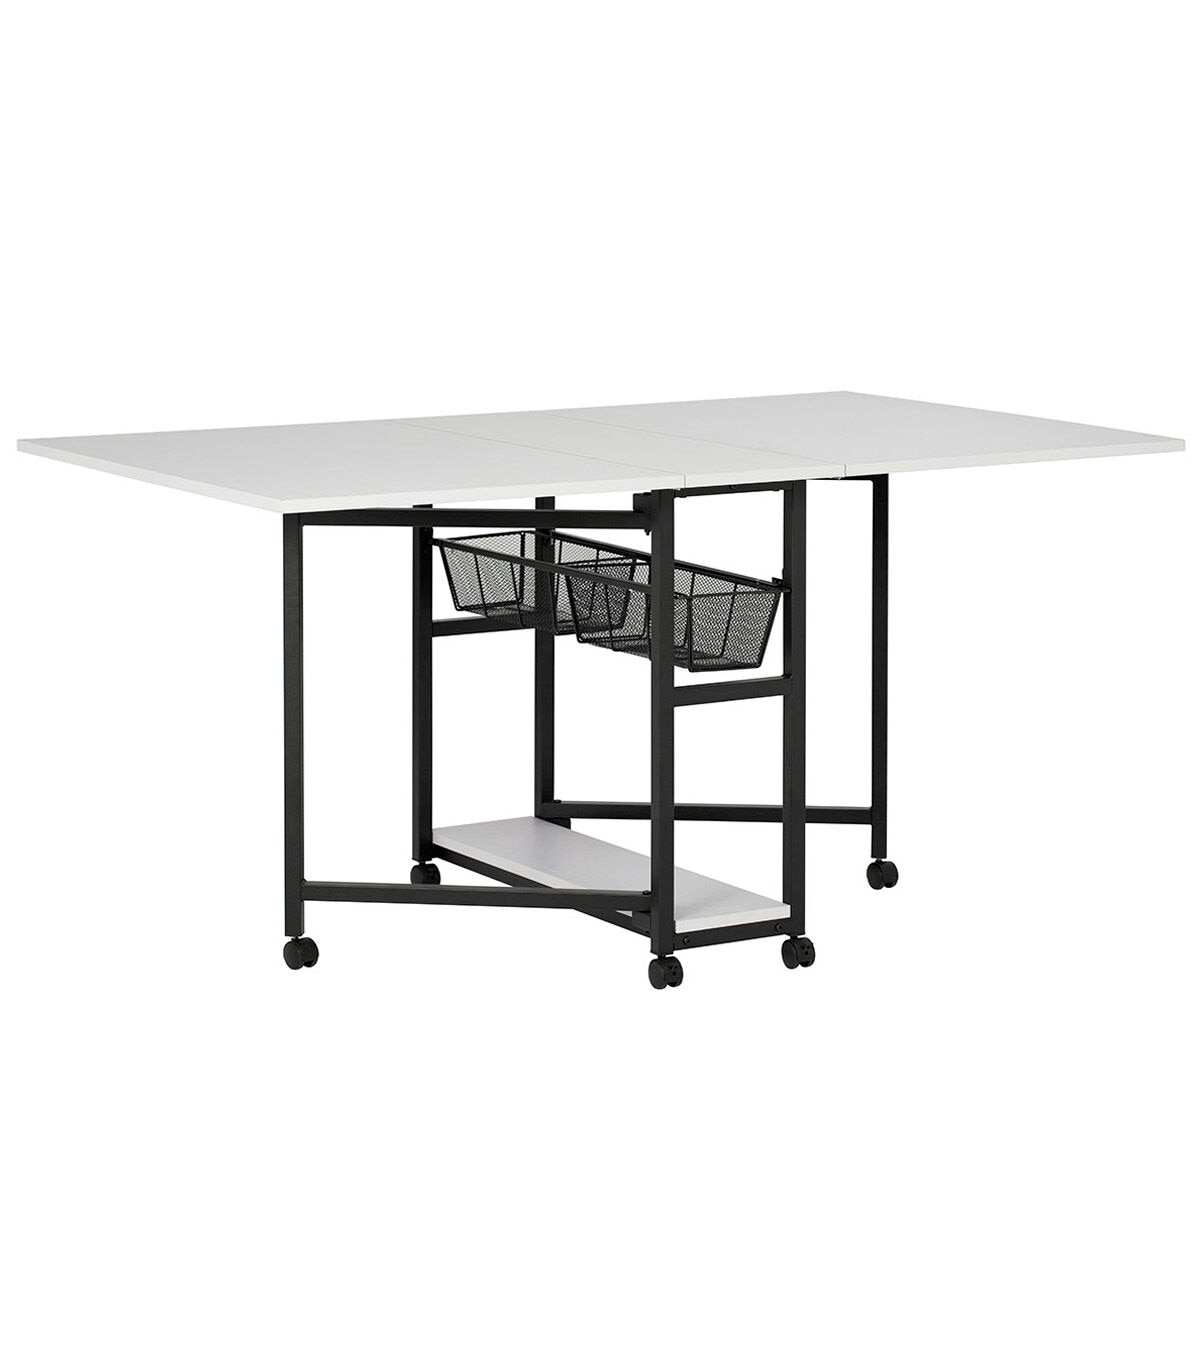 Studio Designs 59 x 36.5 Mobile Fabric Cutting Table With Storage